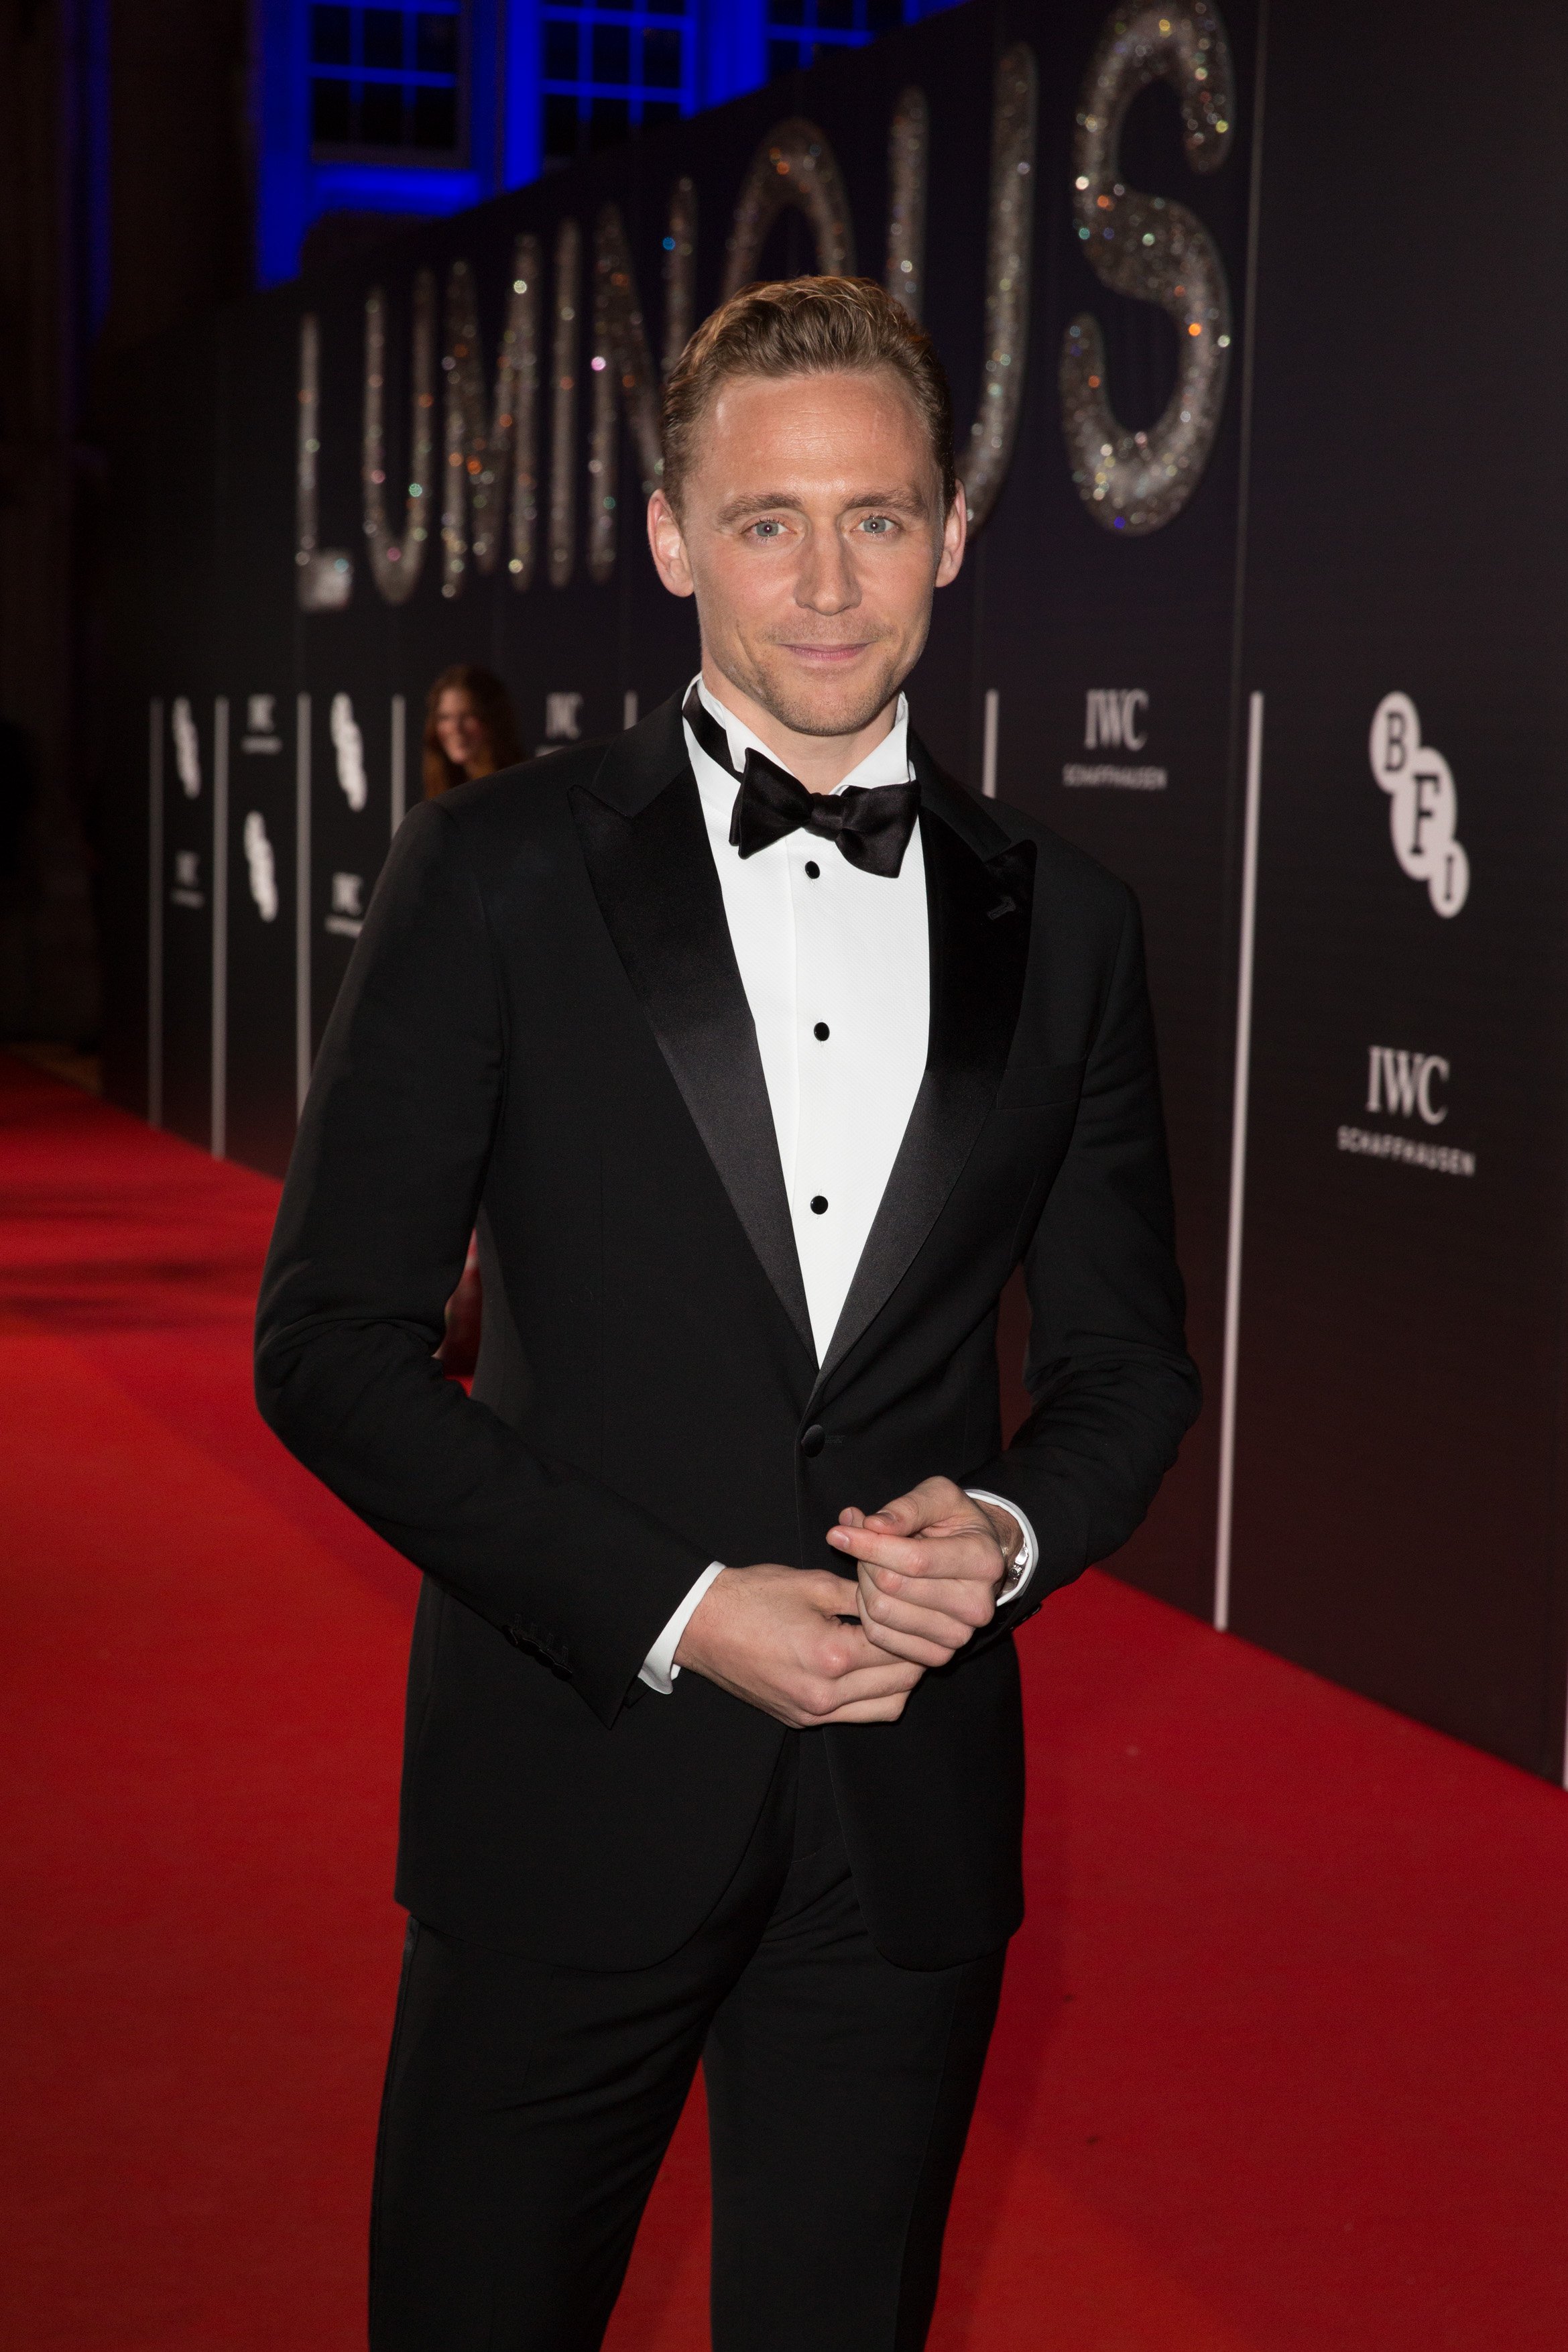 Tom Hiddleston attends the BFI LUMINOUS In Partnership With IWC Schaffhausen Gala Event